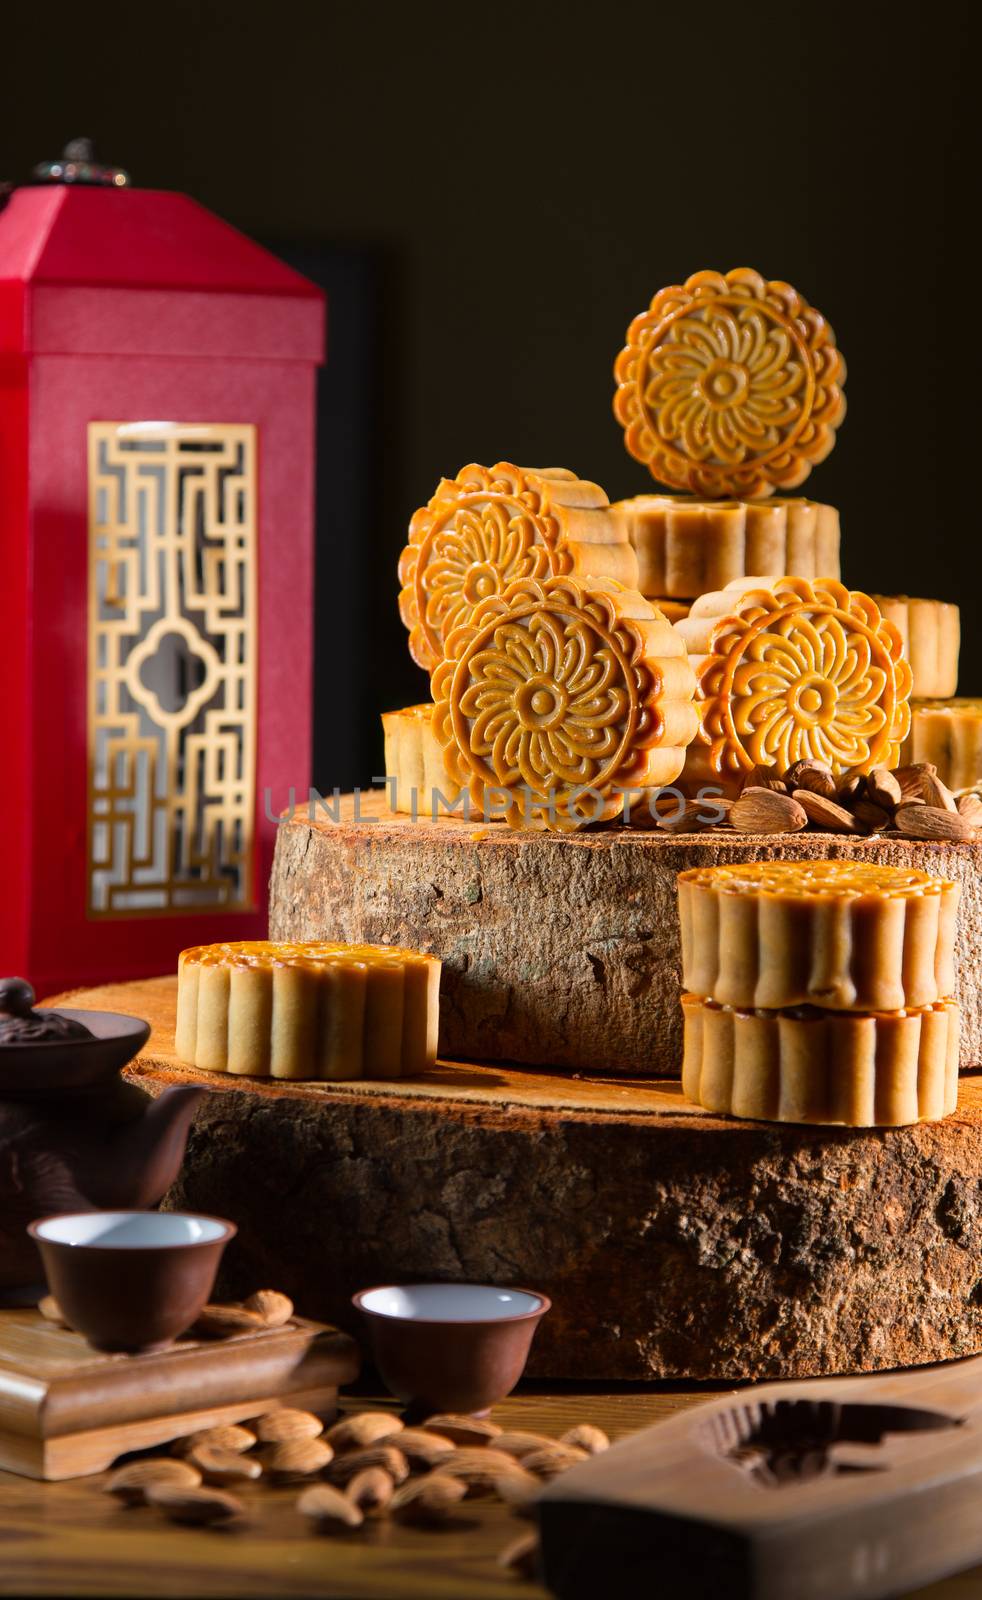 Mooncake by tehcheesiong